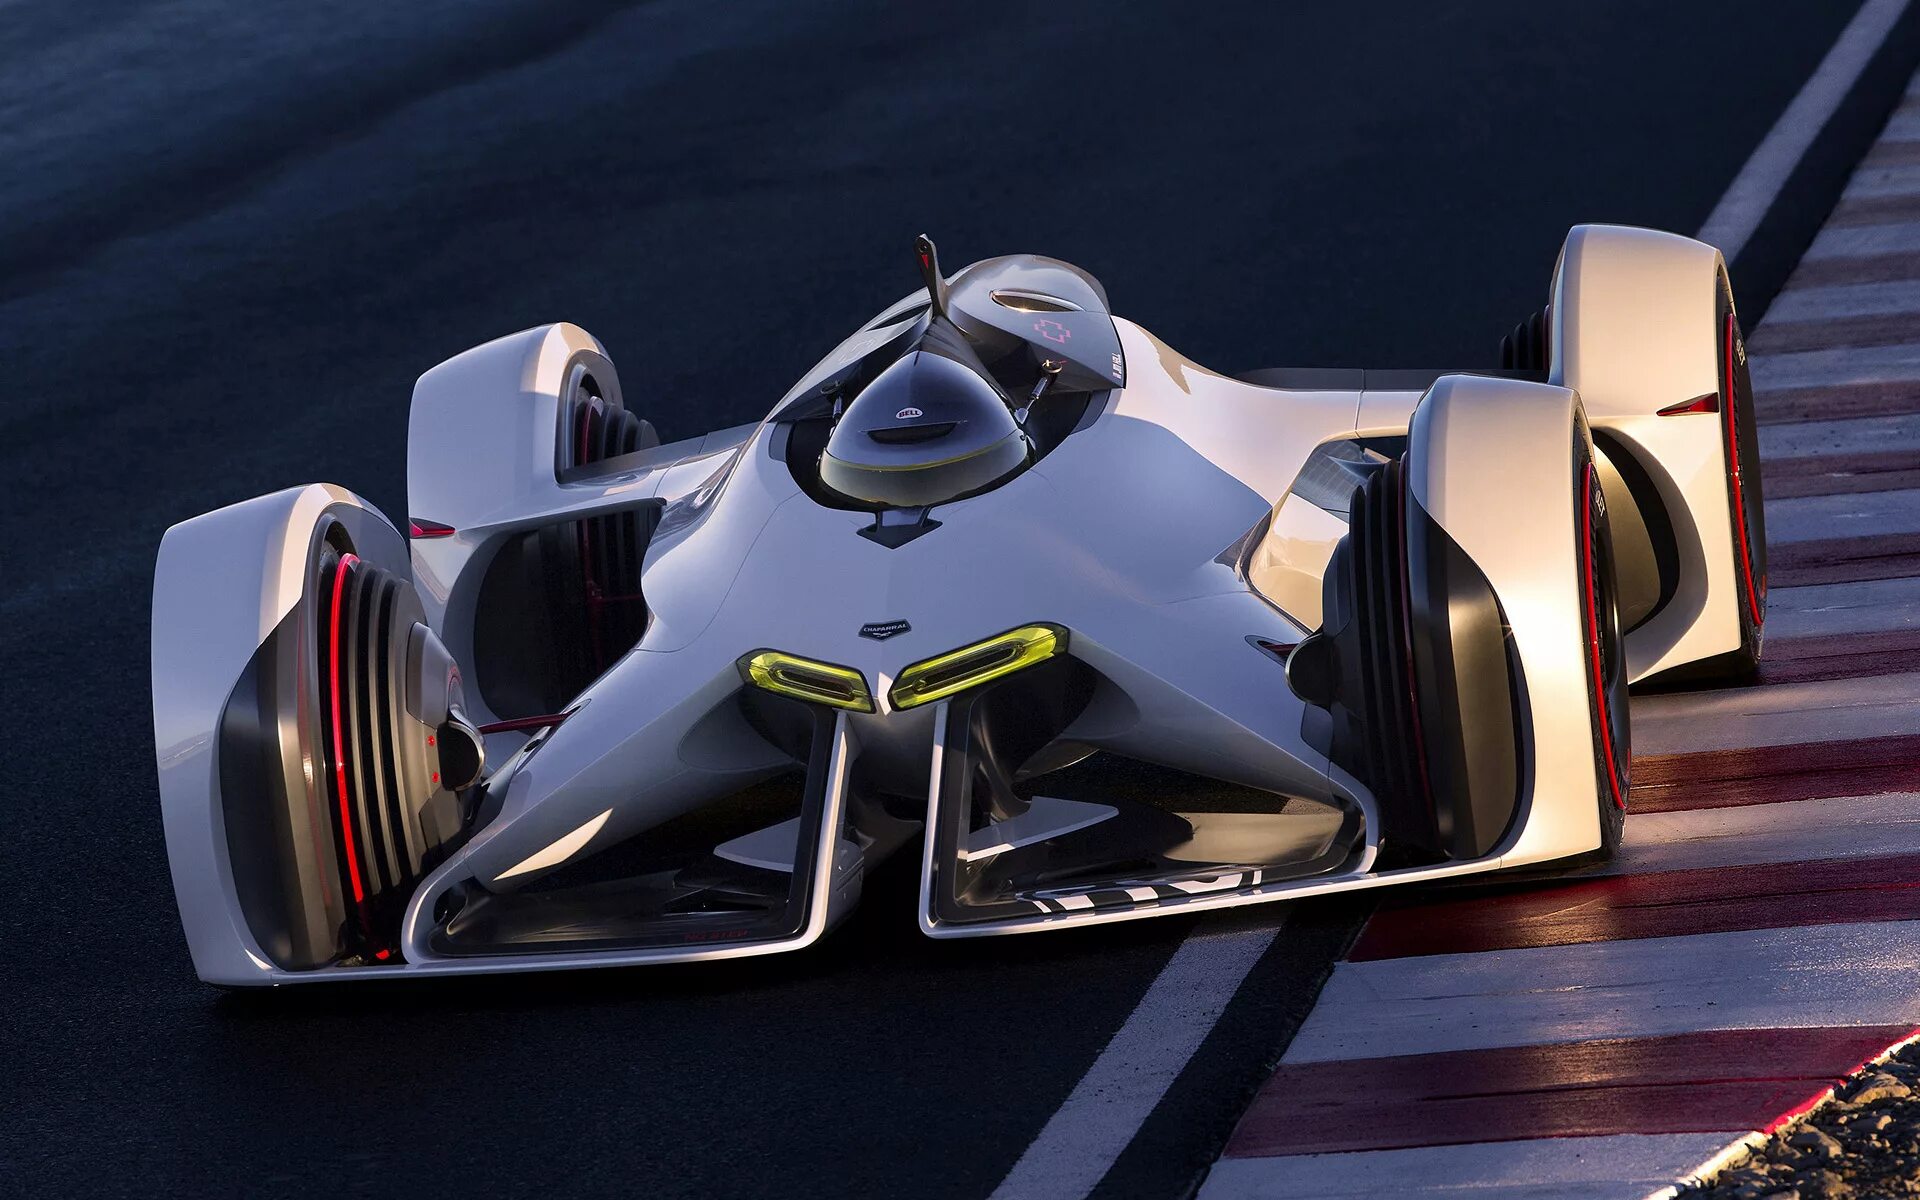 Кар x 2. Chevrolet Chaparral 2x Vision. Chevrolet Chaparral 2x Vision gt. Chevrolet Chaparral 2x Vision Gran Turismo. Chaparral 2x VGT.